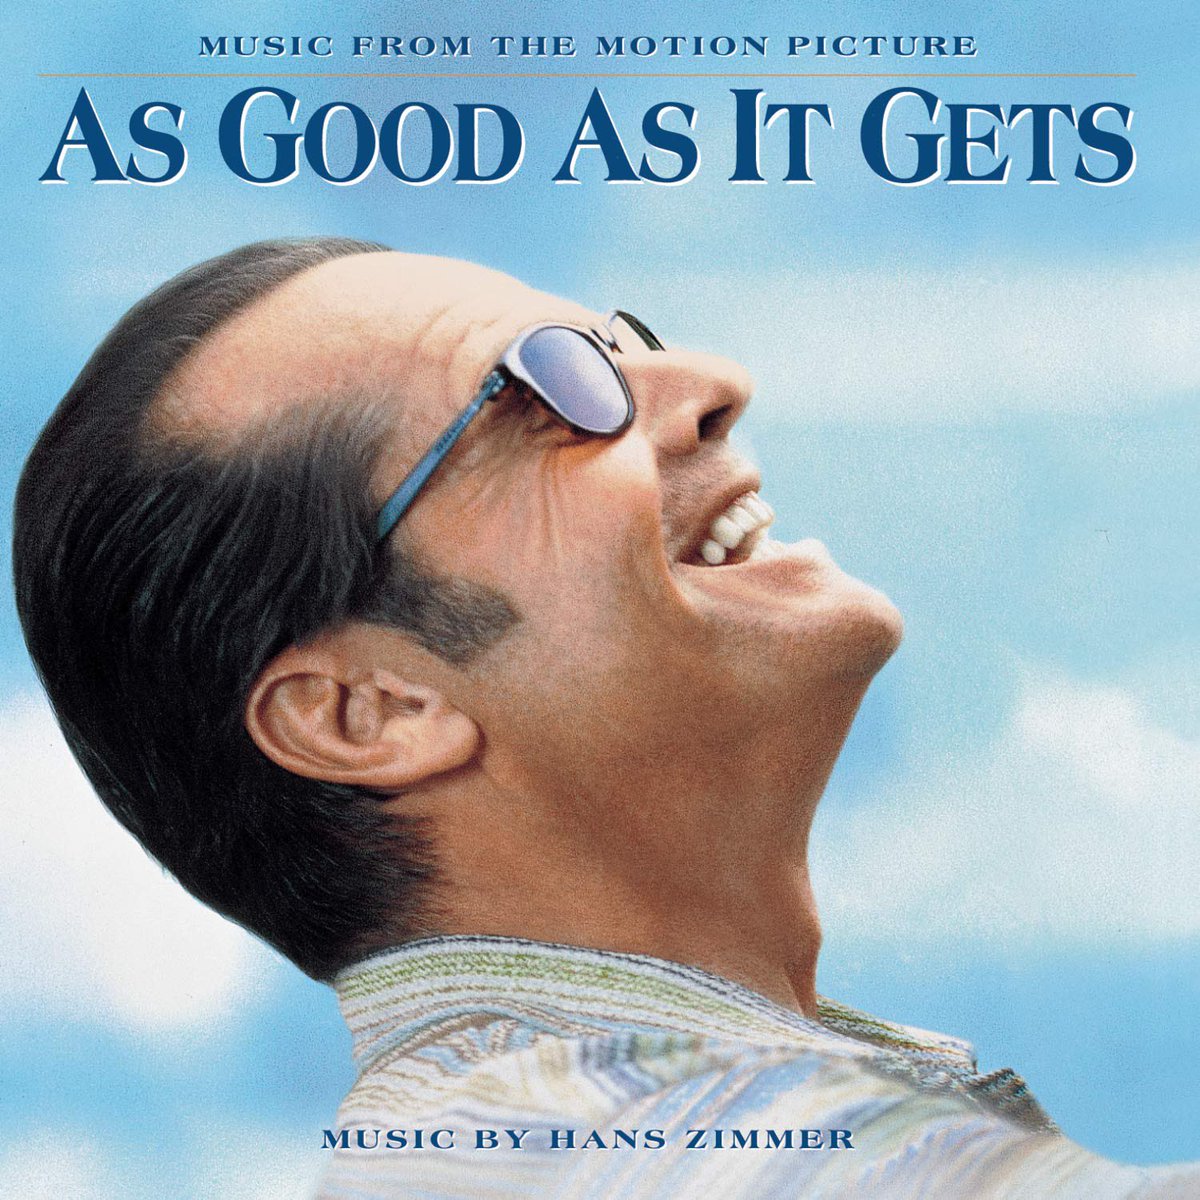 On this day in 1997 'As Good as It Gets' released…

Written and directed by James L. Brooks, starring #JackNicholson and #HelenHunt 🎥

Music by #HansZimmer 🎵